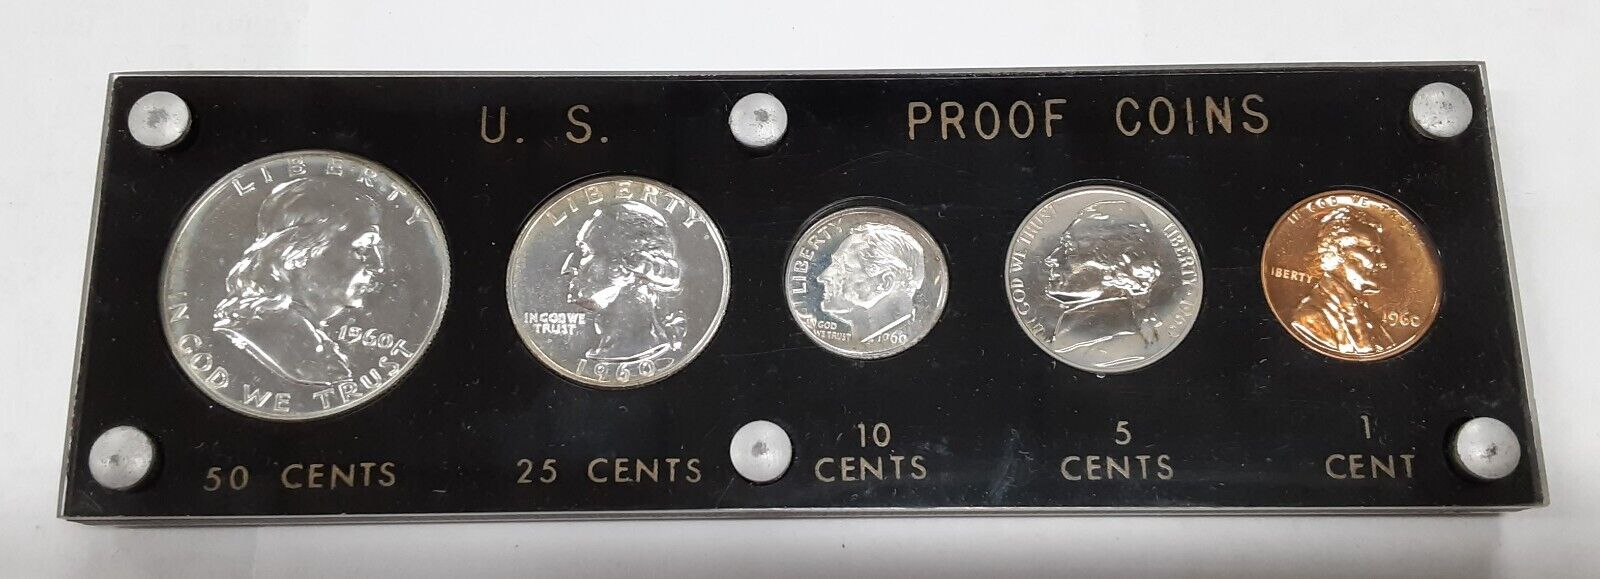 1960 Proof Year Set 5 Silver Coins w/Half, Quarter, & Dime in Black Holder (A)